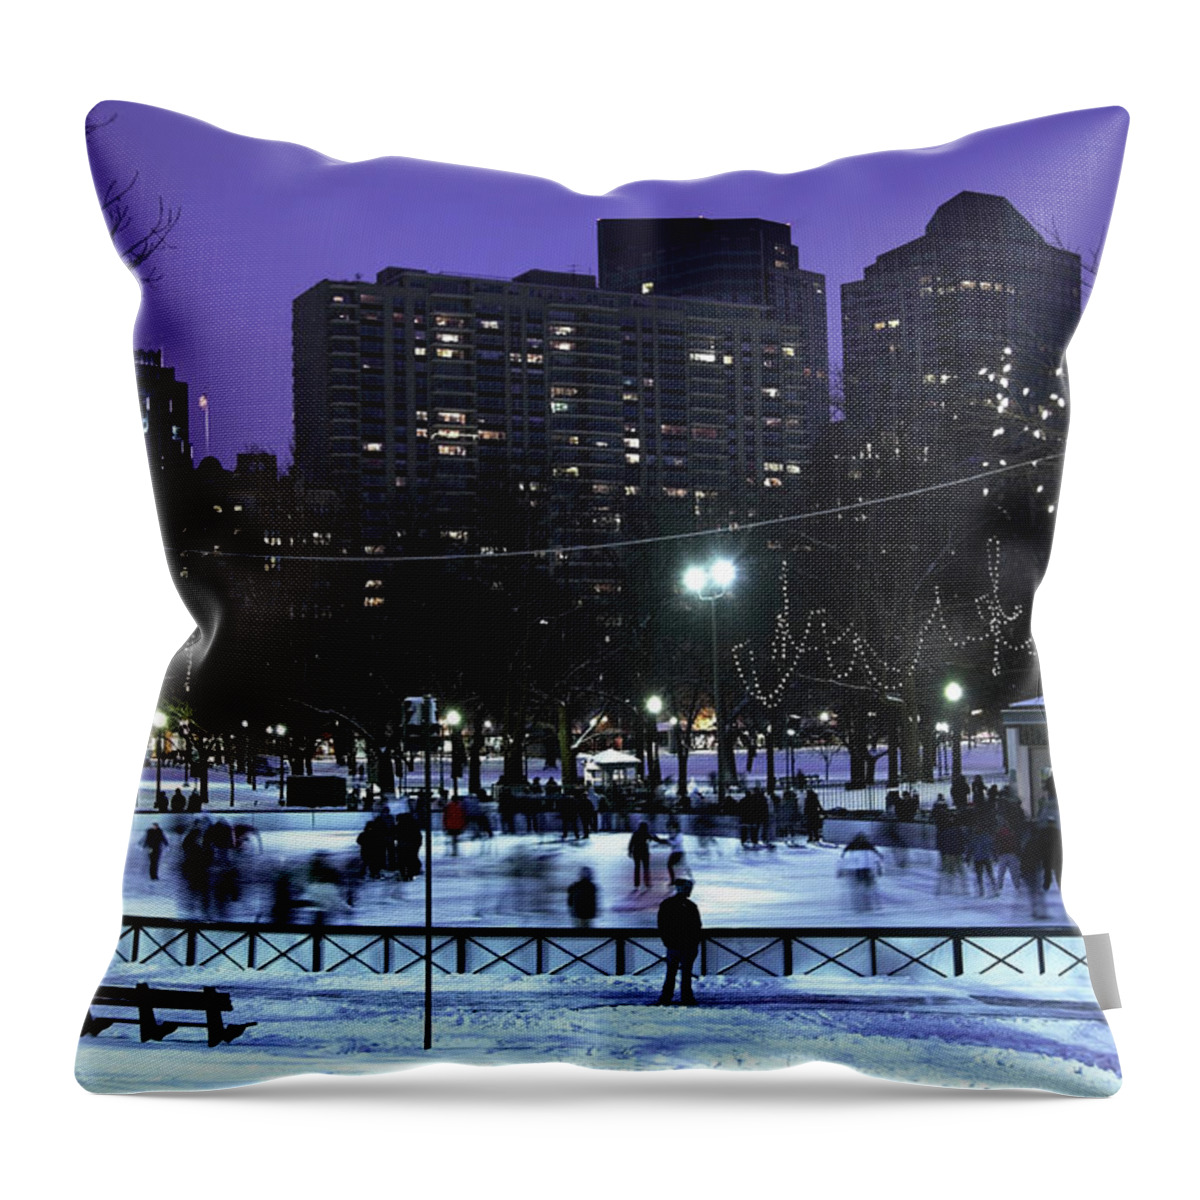 New England Throw Pillow featuring the photograph Ice Skating On Frog Pond by Denistangneyjr